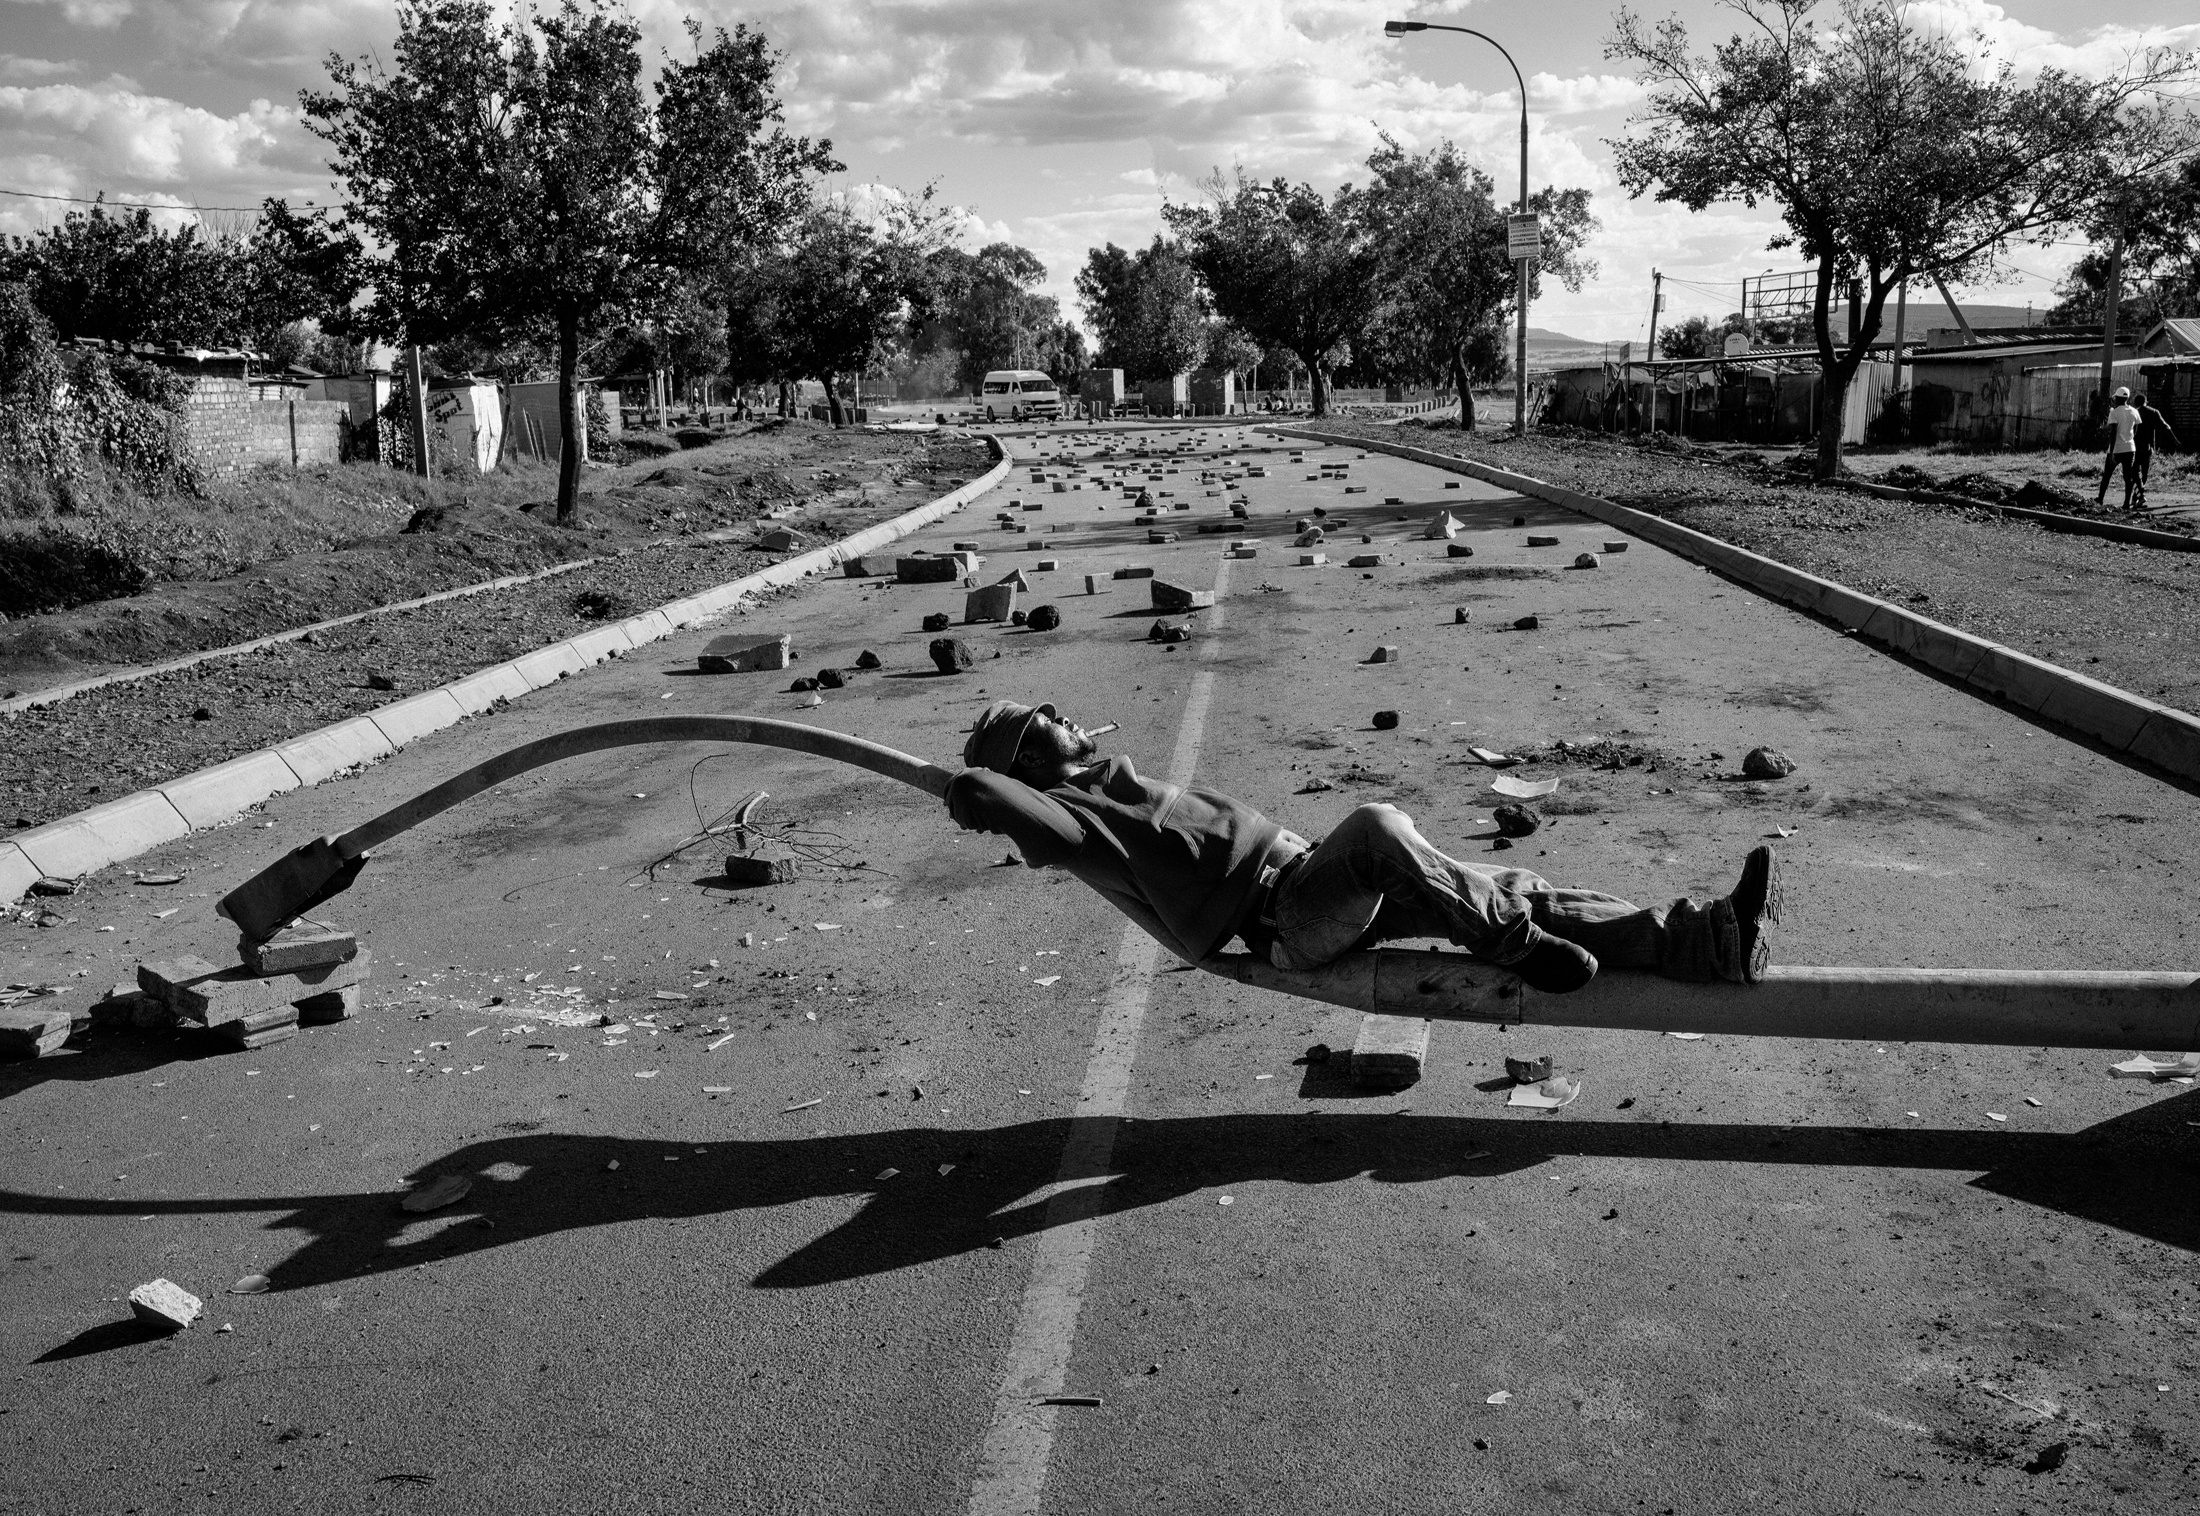 Lindokuhle Sobekwa’s monochrome photographic print ‘After a protest related to continuous power cuts during Lockdown Level 5 in Thokoza’ depicts the aftermath of protest action.
